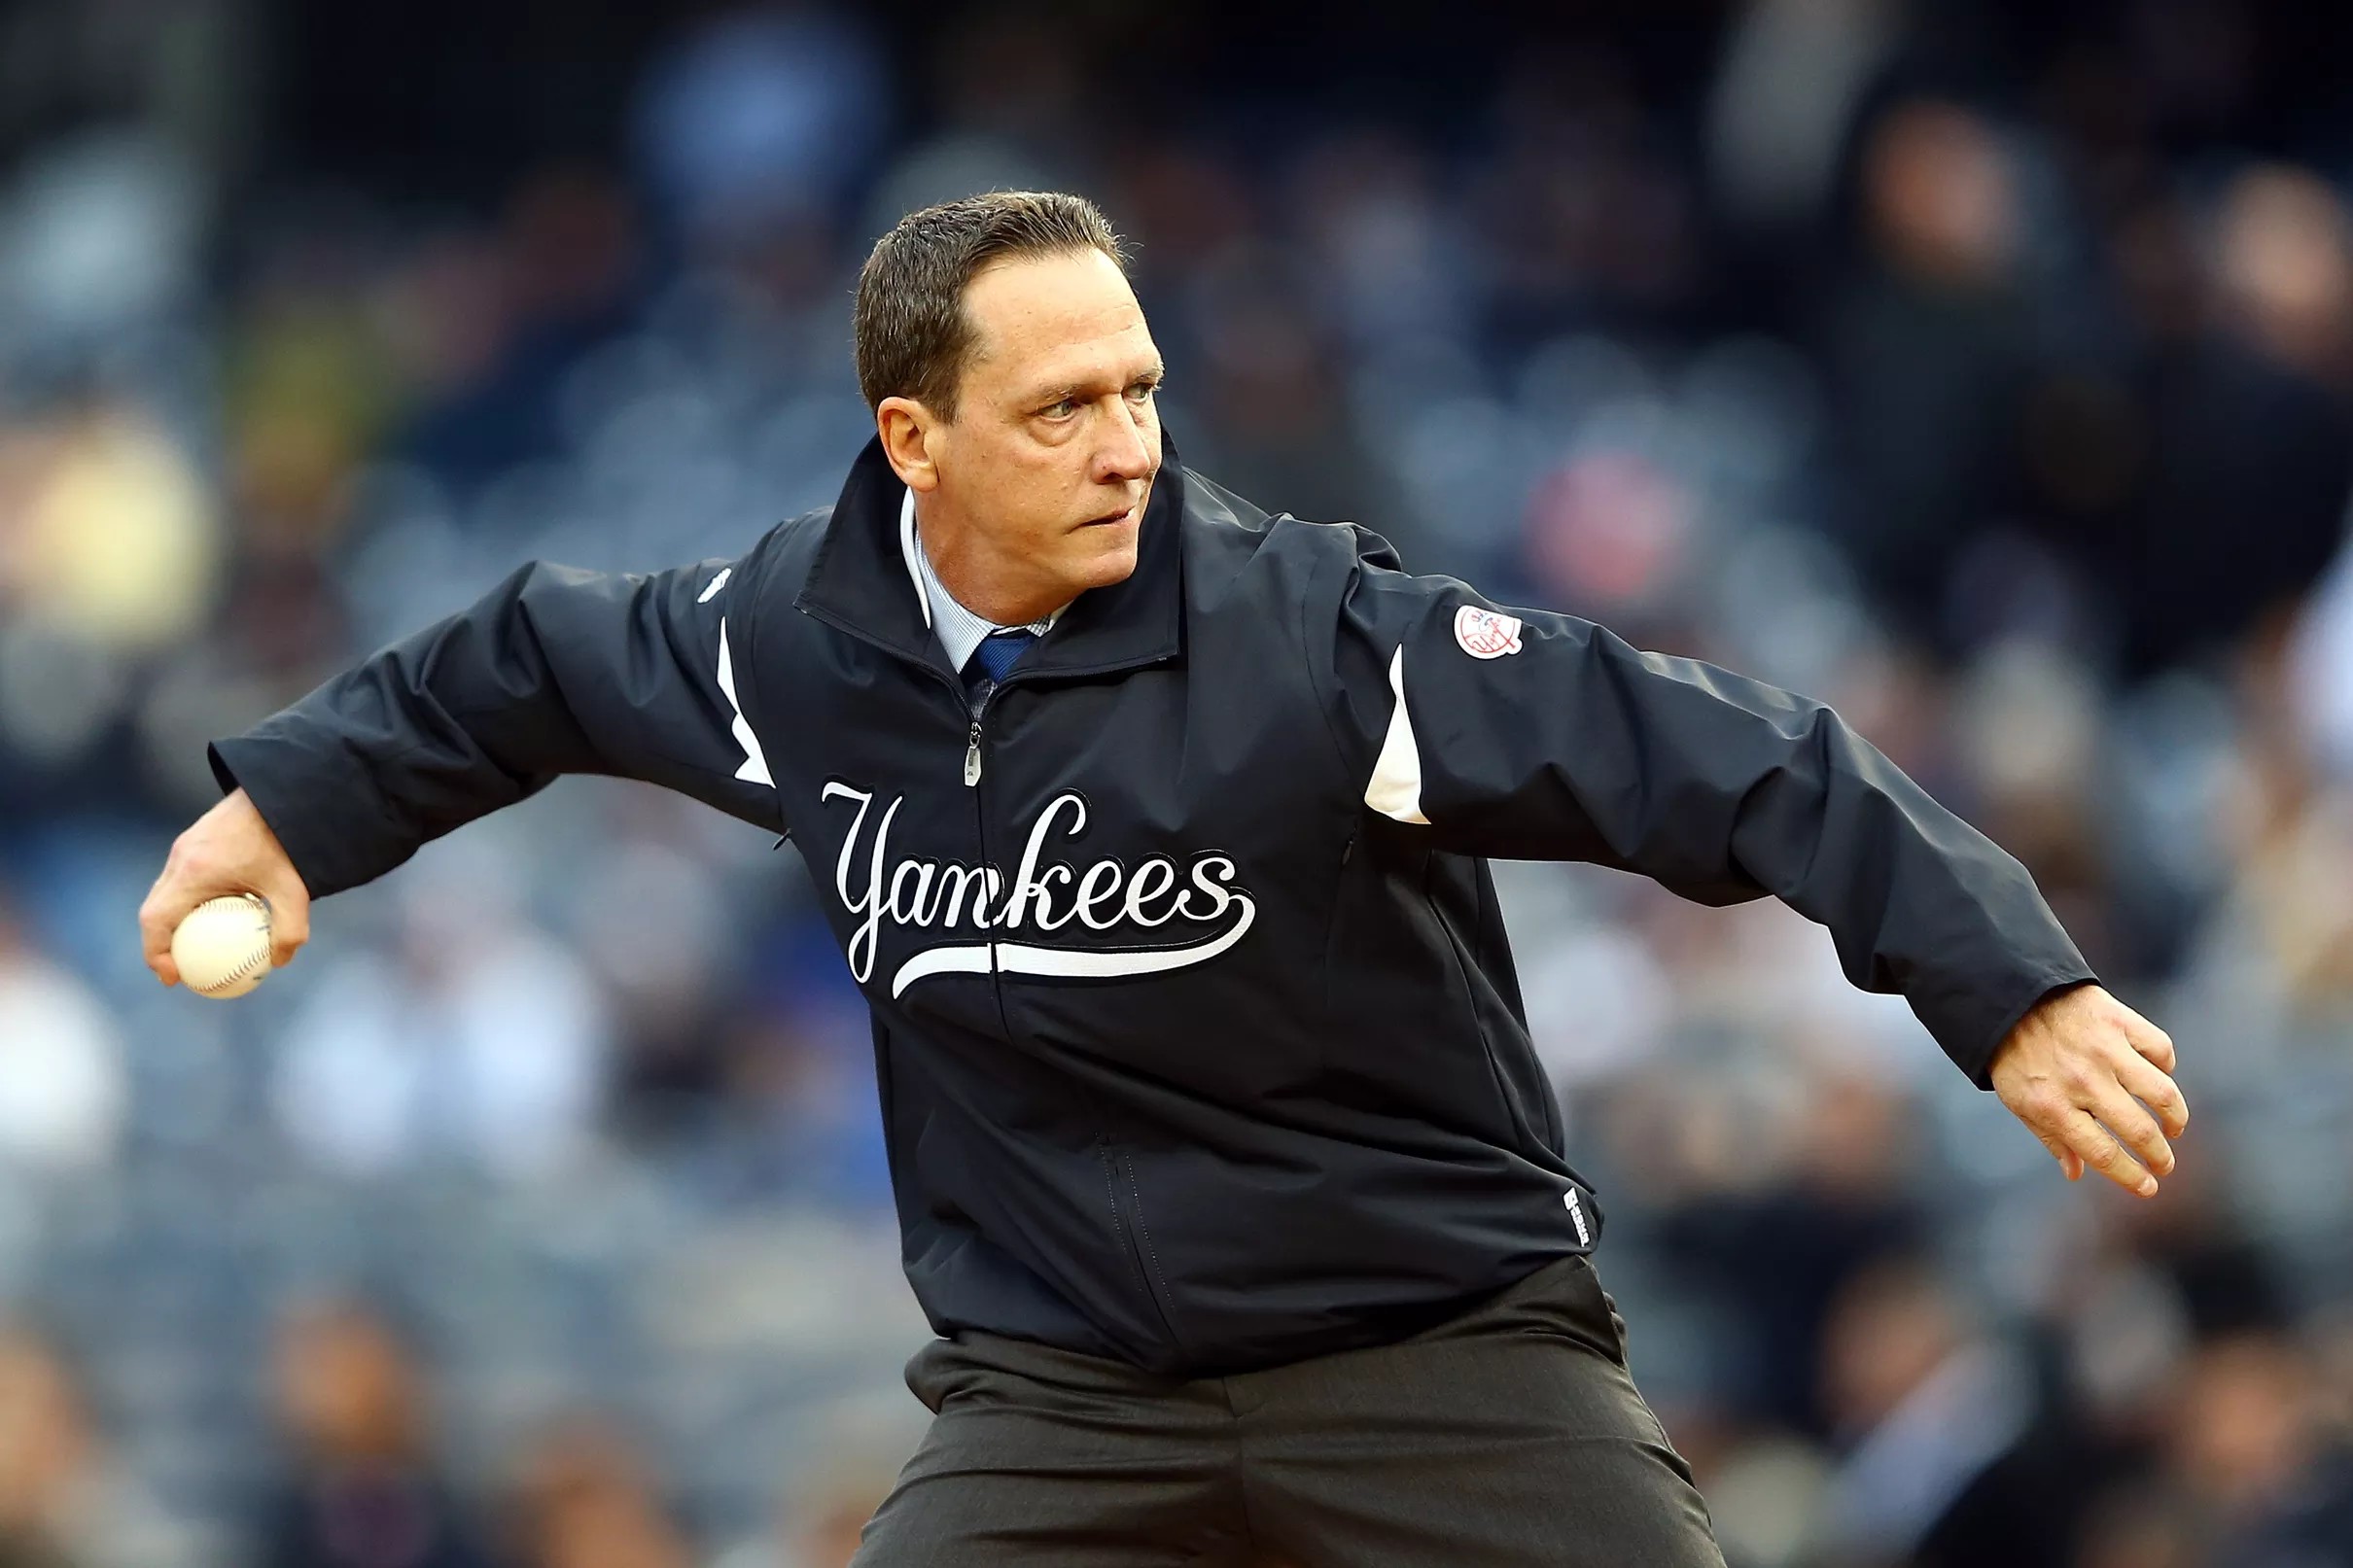 Former Yankees pitcher David Cone and Jack Curry scrap the traditional